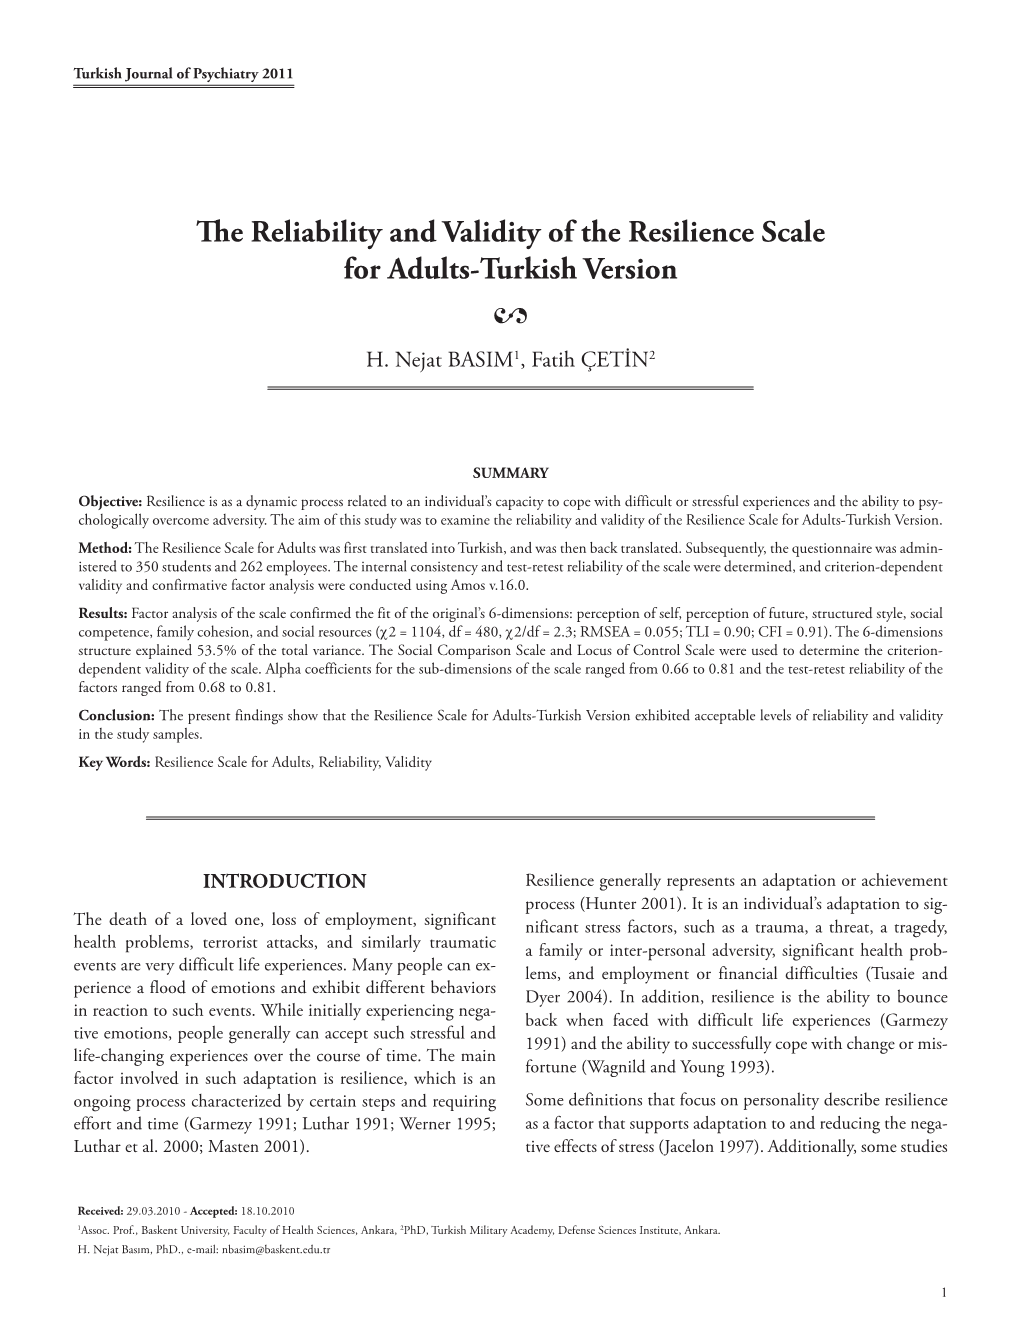 The Reliability and Validity of the Resilience Scale for Adults-Turkish Version